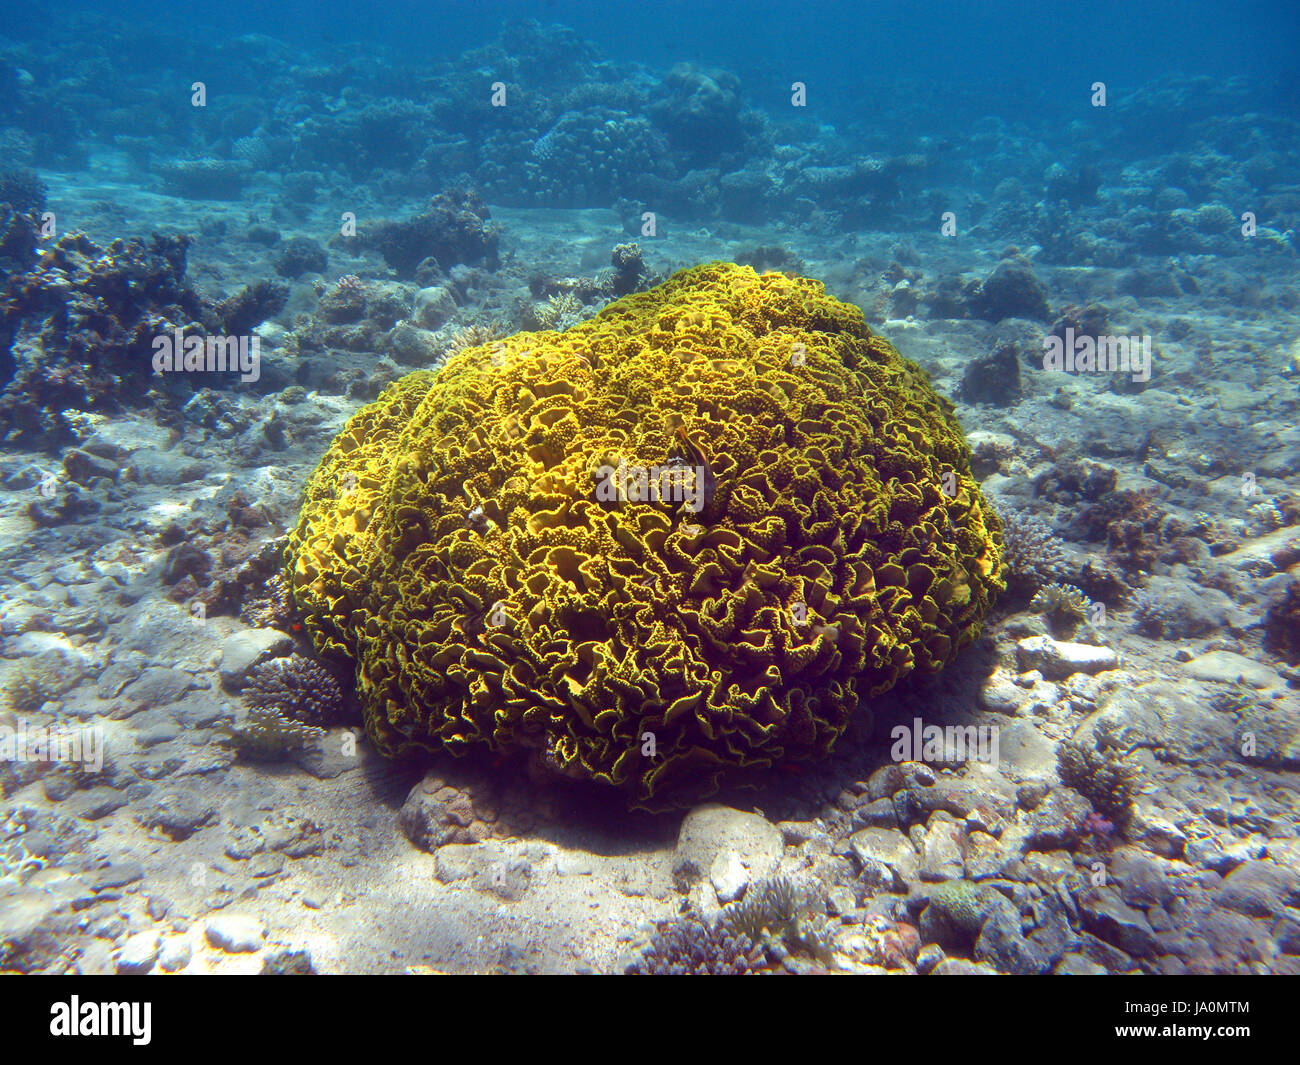 coral reef with single great yellow cup coral coral at the bottom of red sea Stock Photo